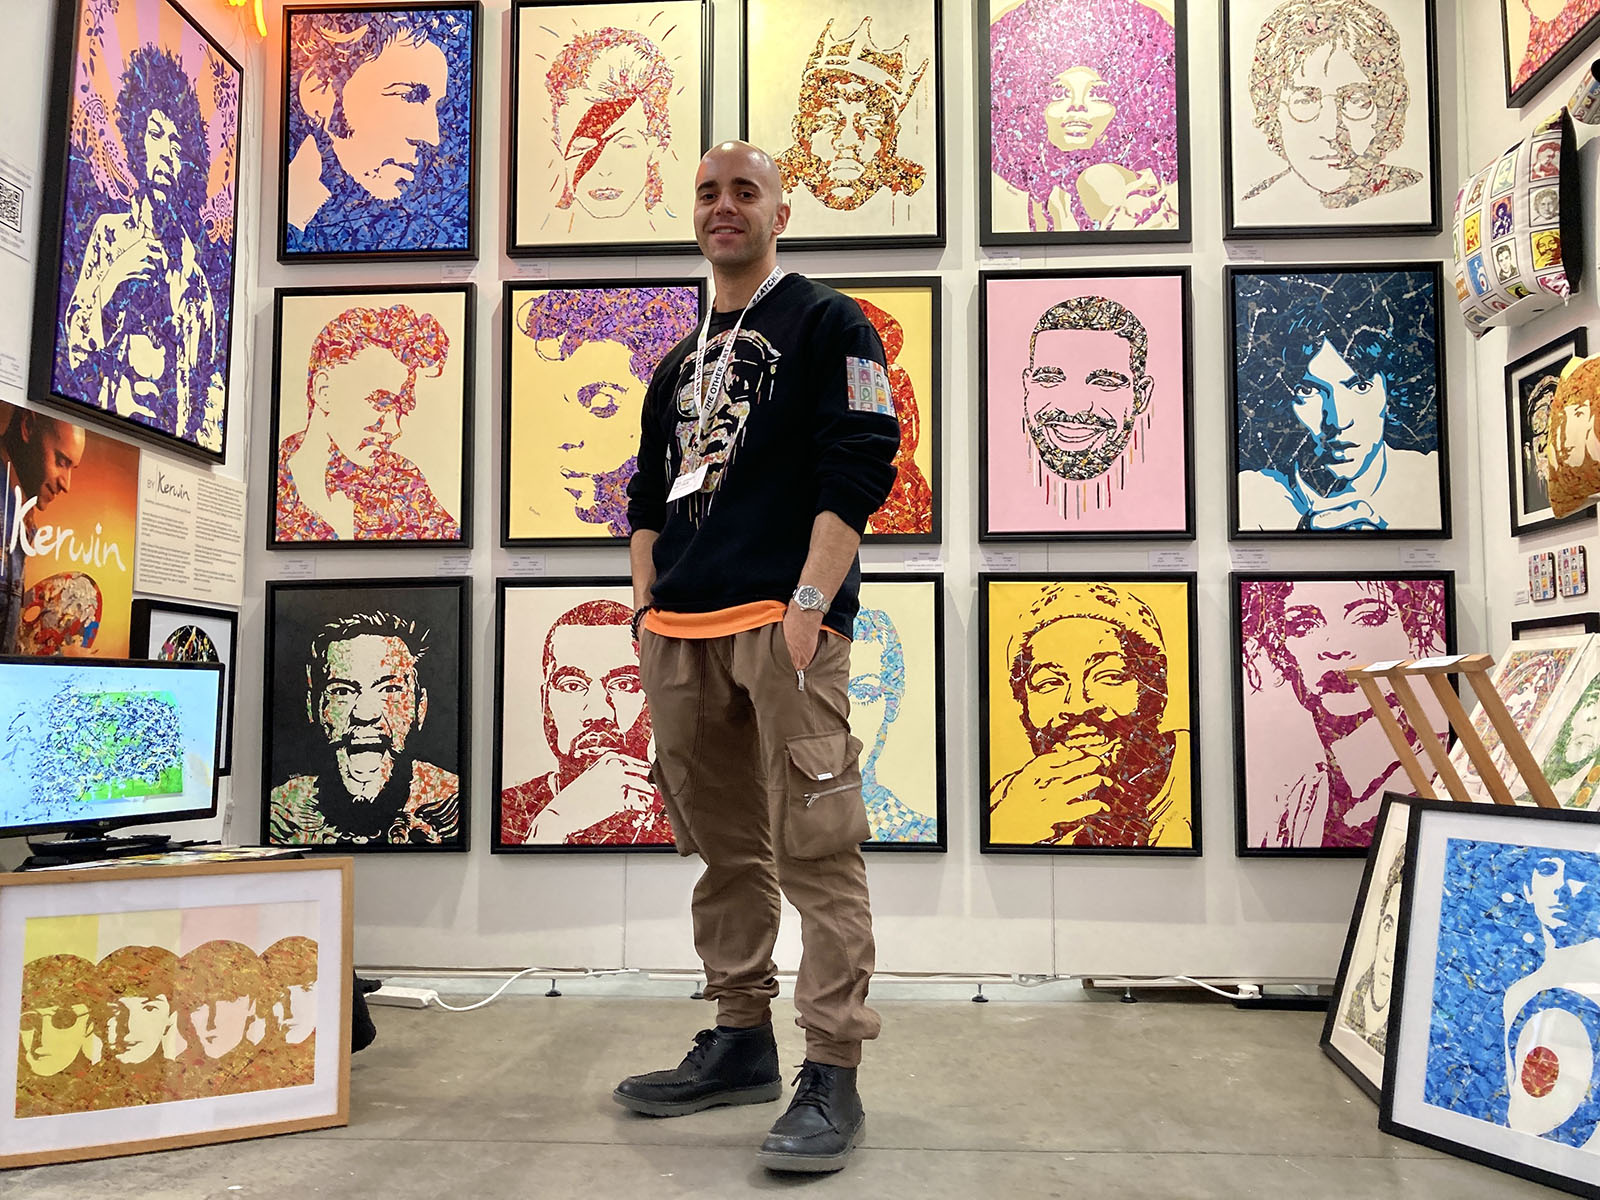 Kerwin Blackburn exhibiting his pop art, Jackson Pollock-inspired music paintings and prints at The Other Art Fair London, October 2021 | By Kerwin